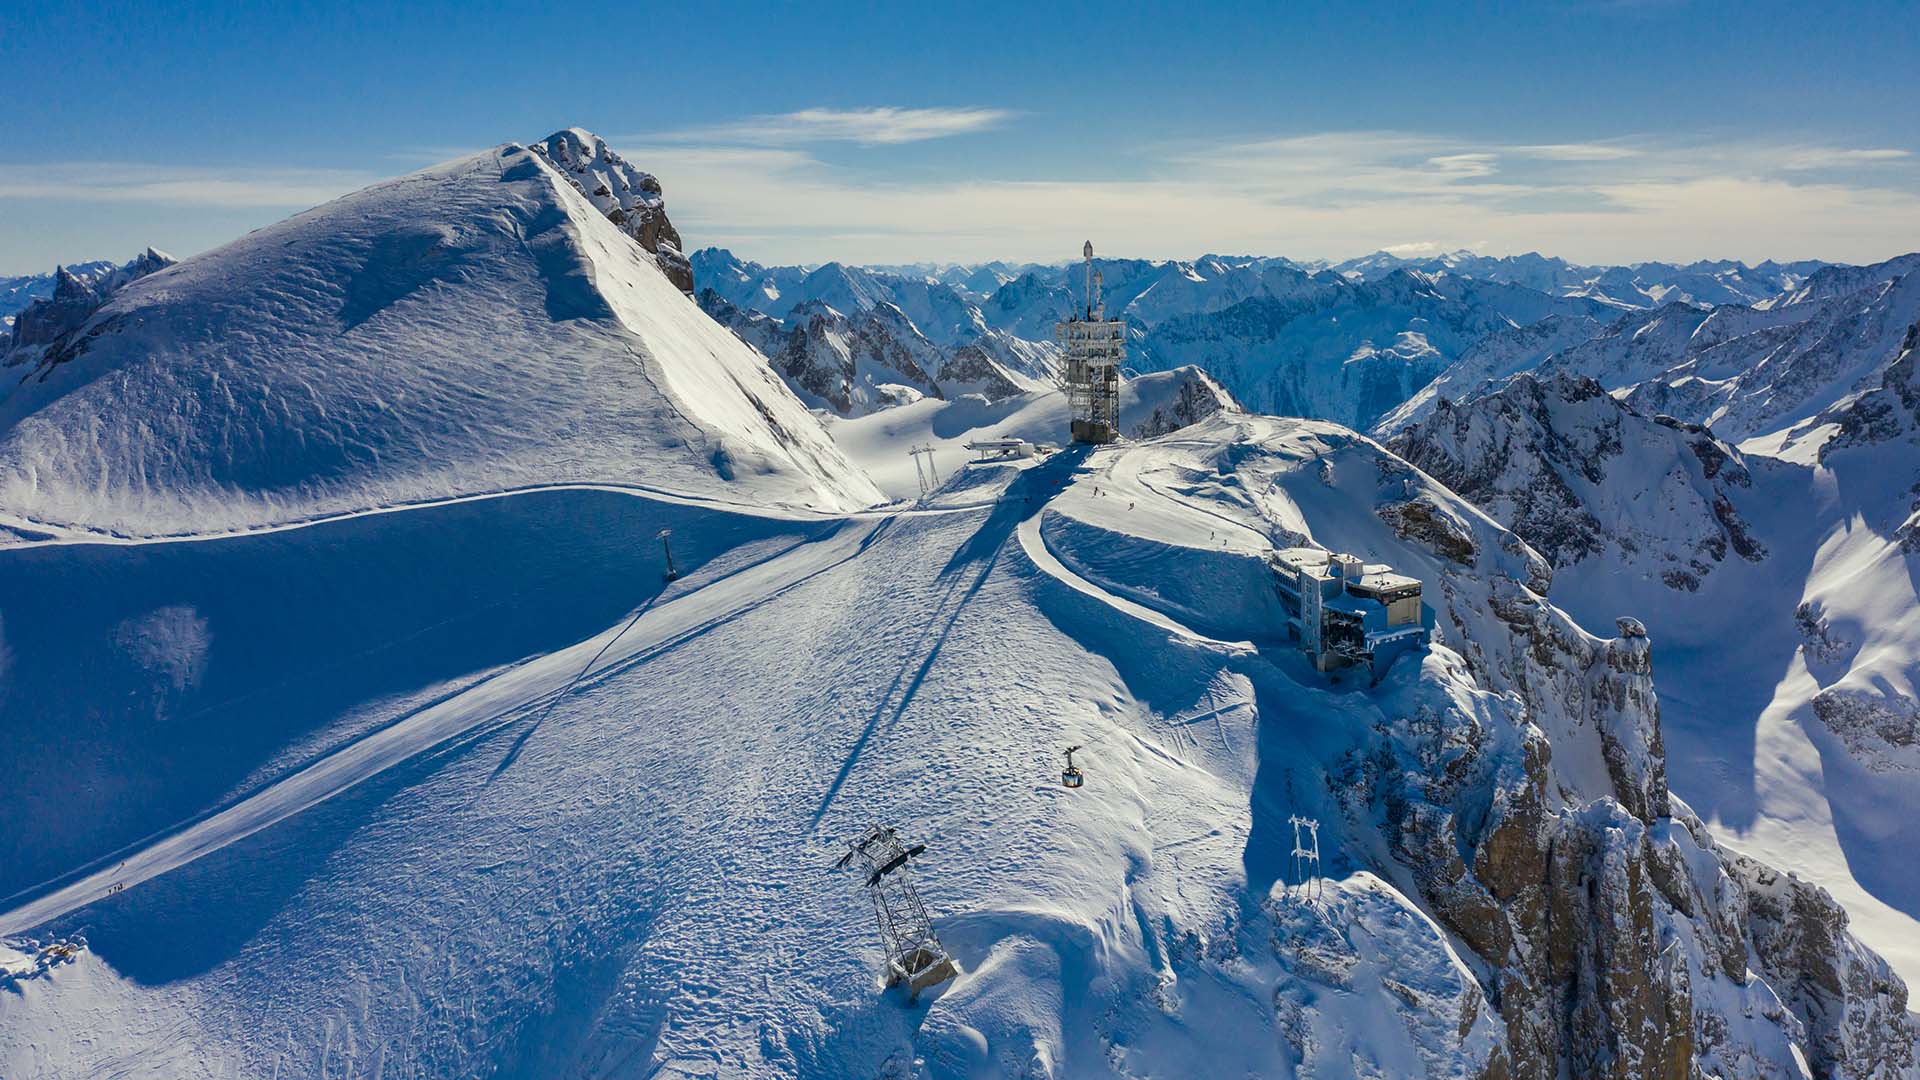 Mt. Titlis: Skiing, snowboarding, tubing & so much more